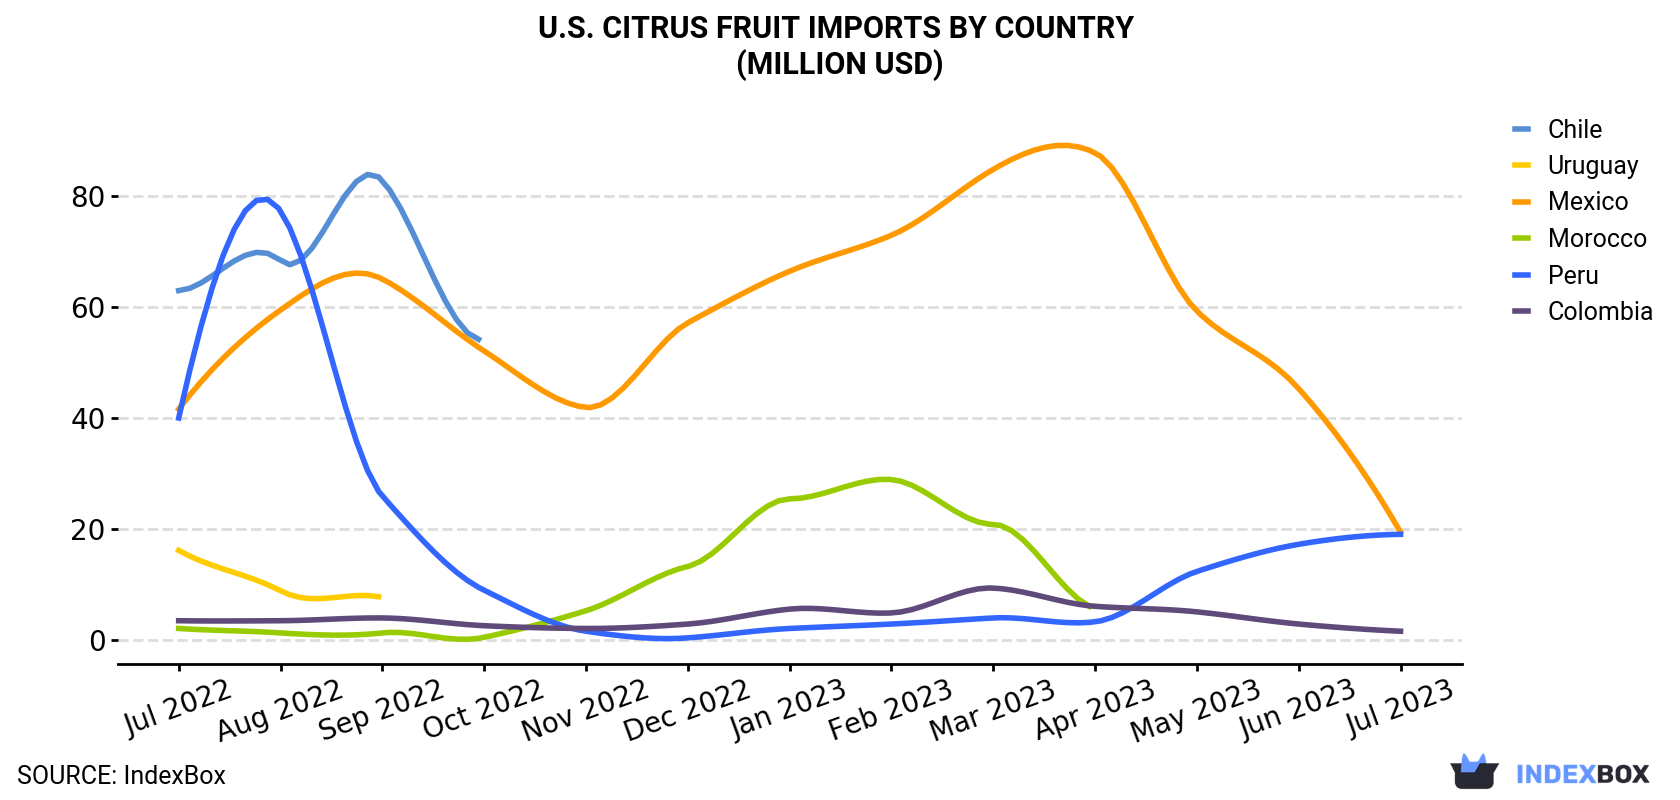 U.S. Citrus Fruit Imports By Country (Million USD)